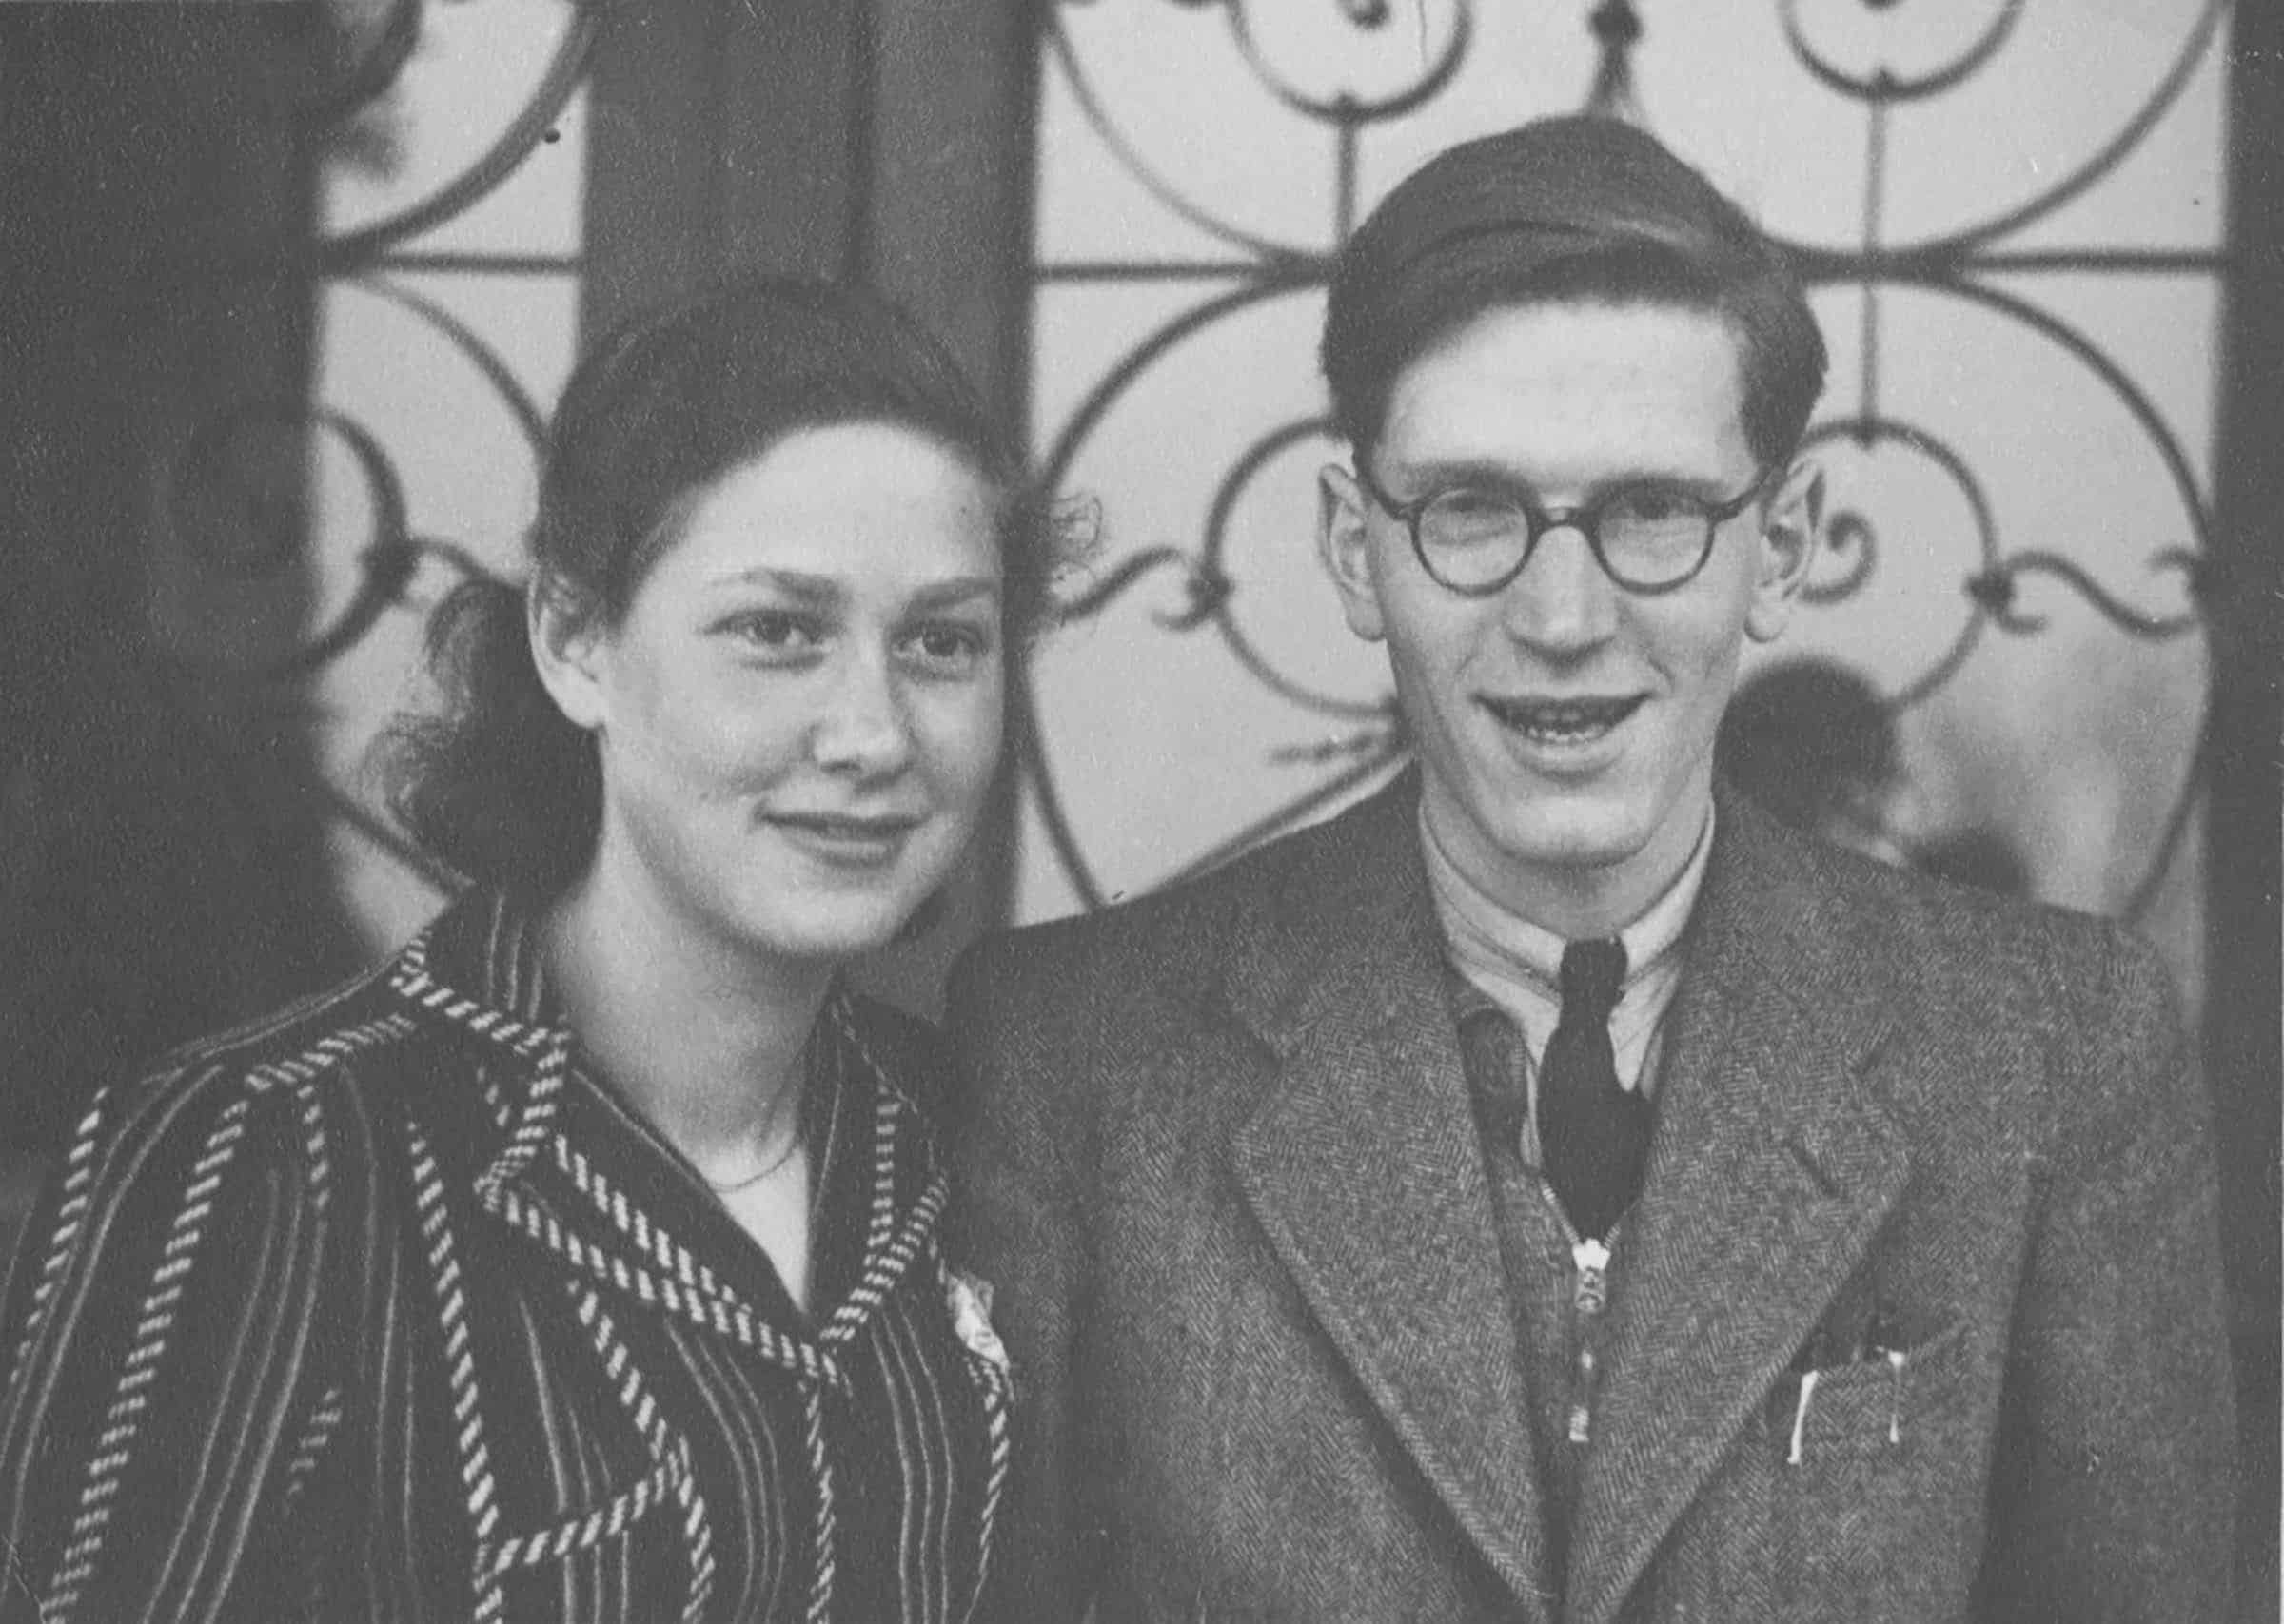 A portrait of Hanne and Max Liebmann 